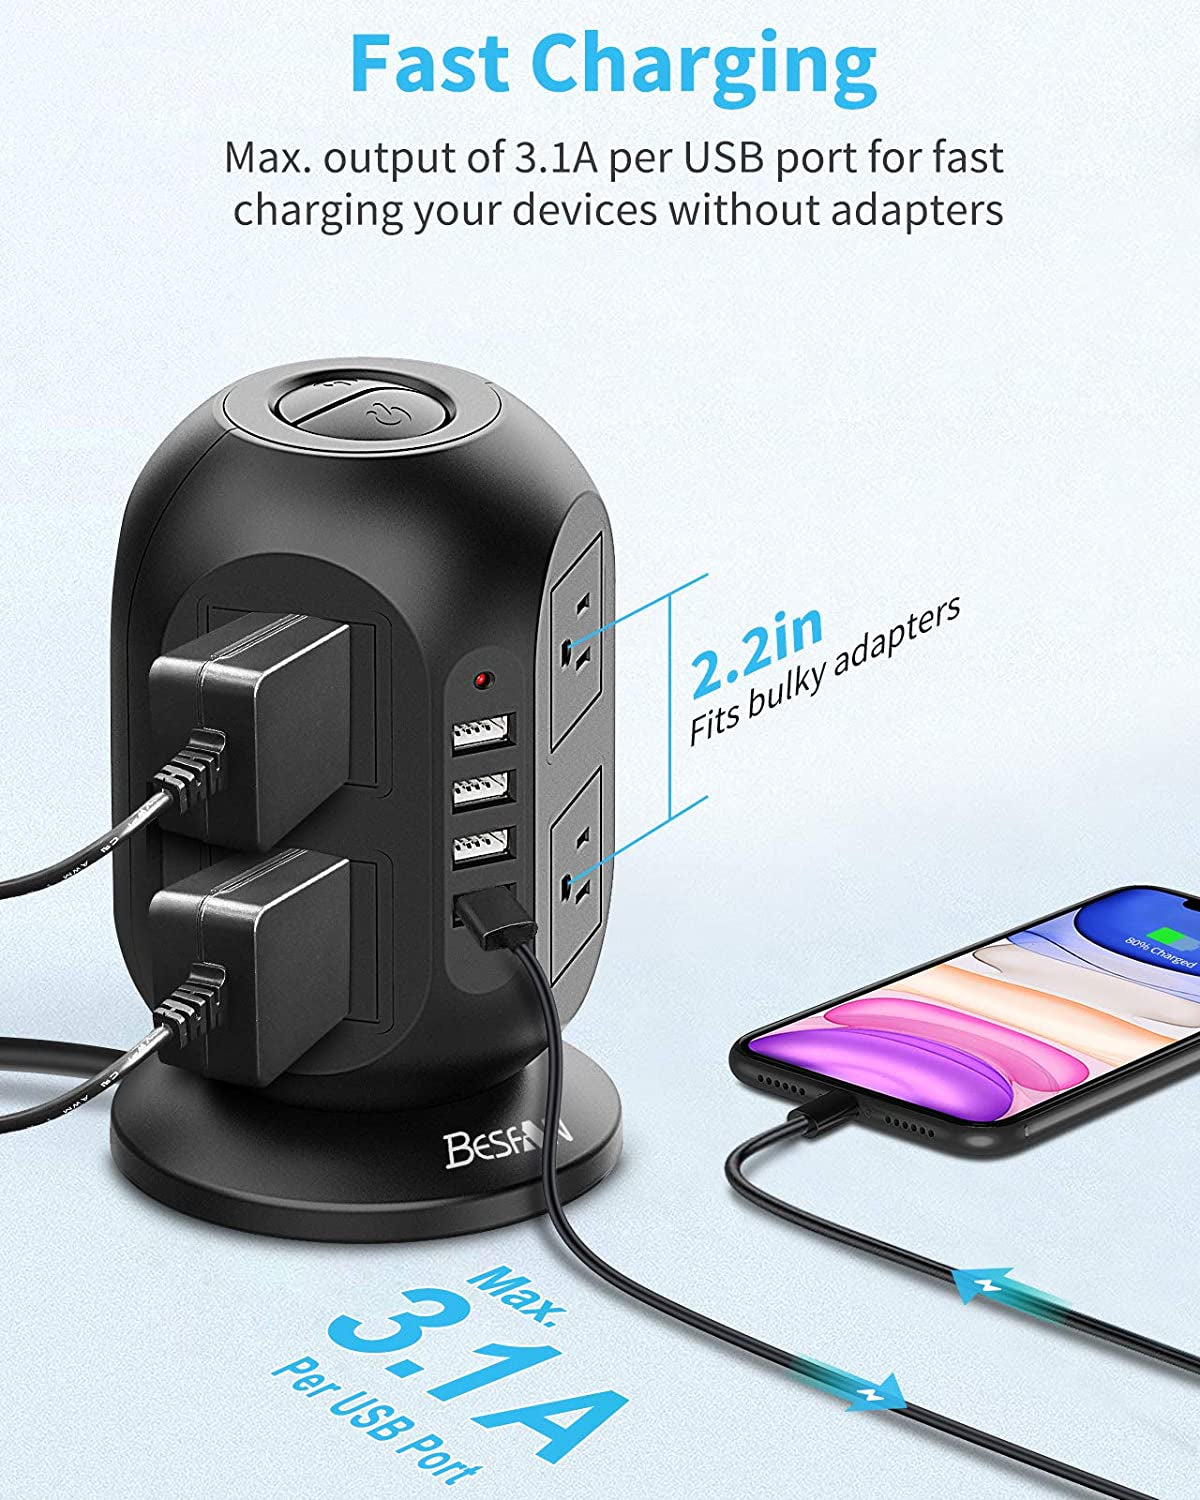 "Premium Tower Power Strip Surge Protector with Extended Cord – Safely and Efficiently Charge All Your Devices!"